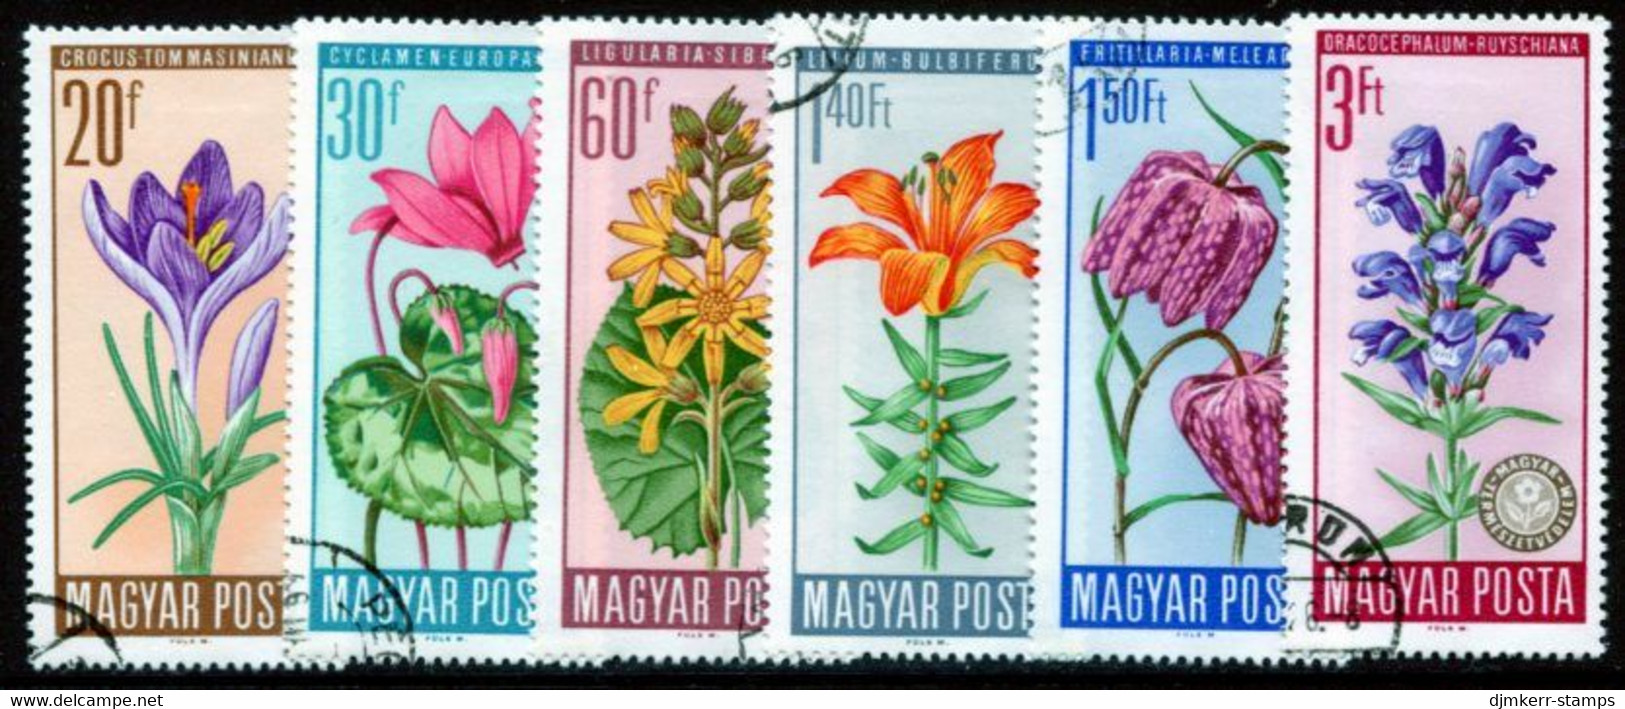 HUNGARY 1966 Protected Flowers Used.  Michel 2212-17 - Usado